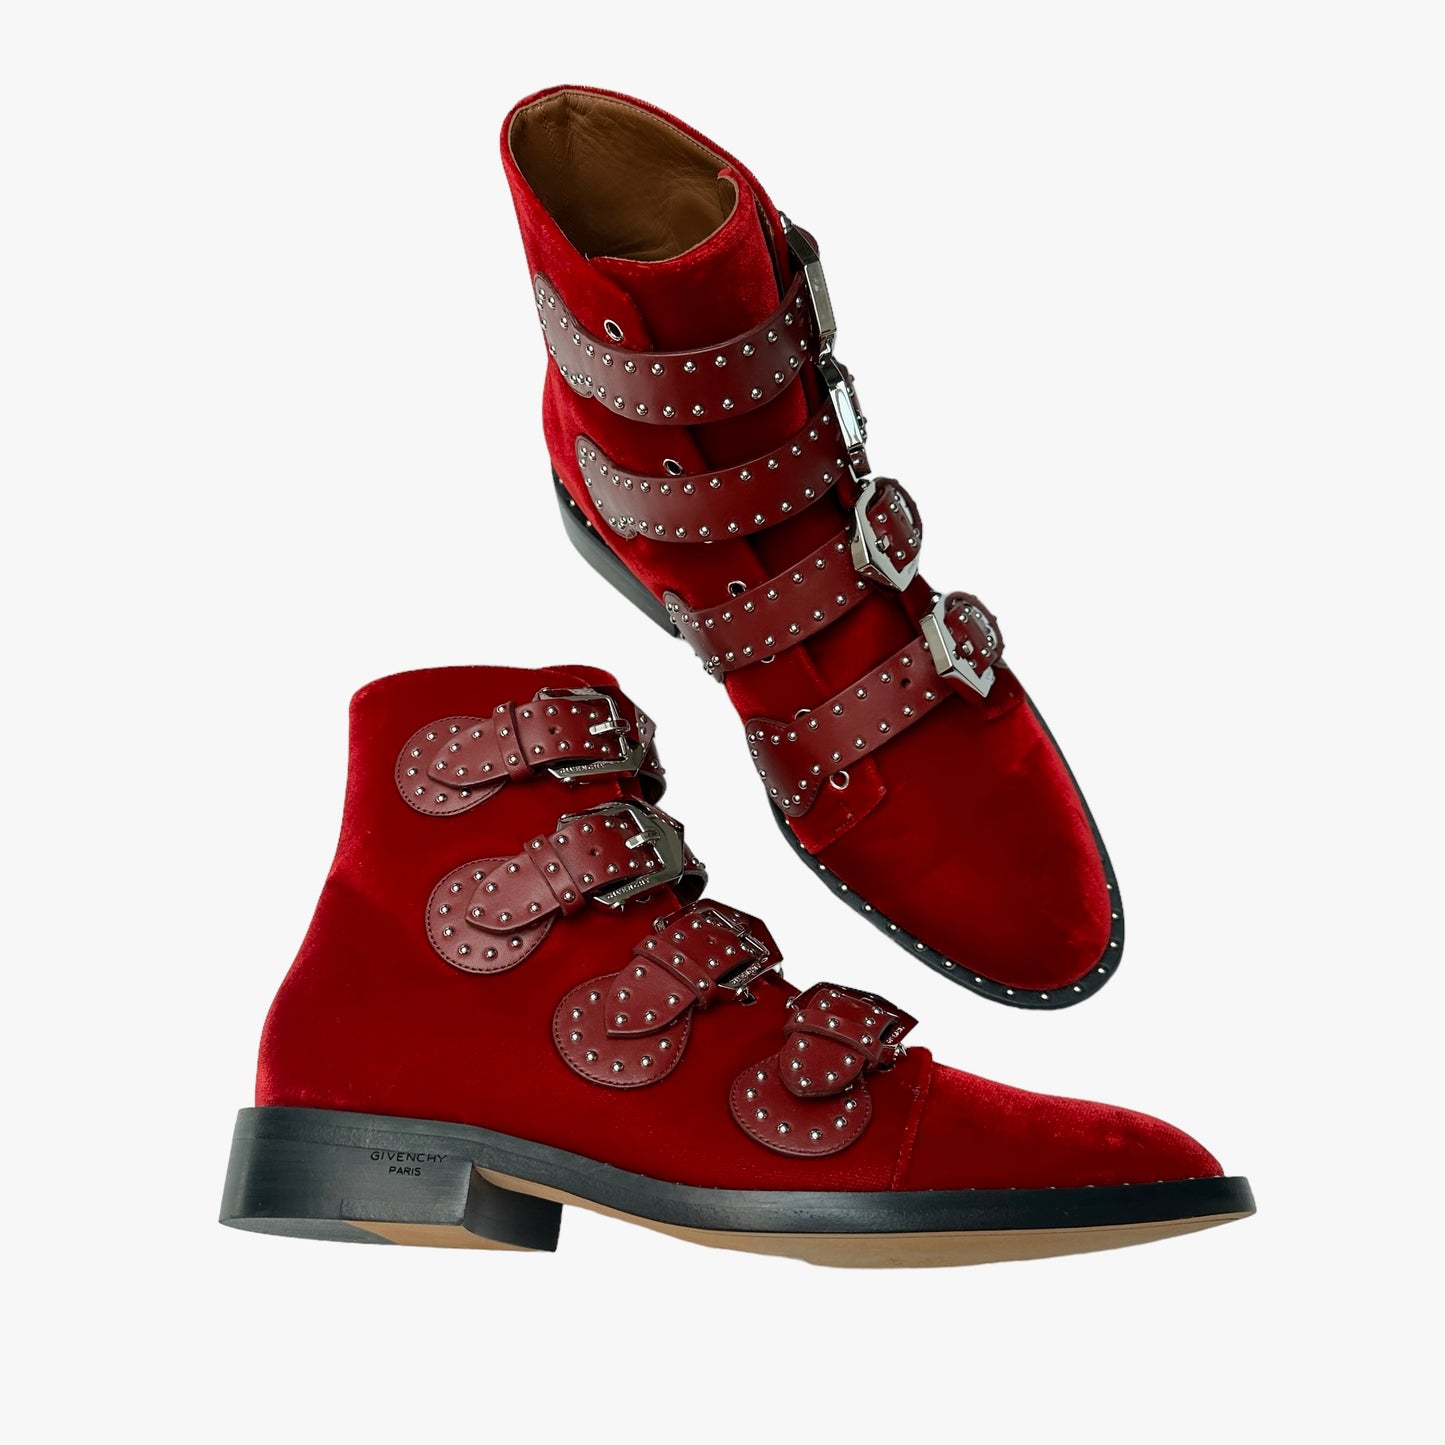 Red Velvet and Studs Boots - 7.5